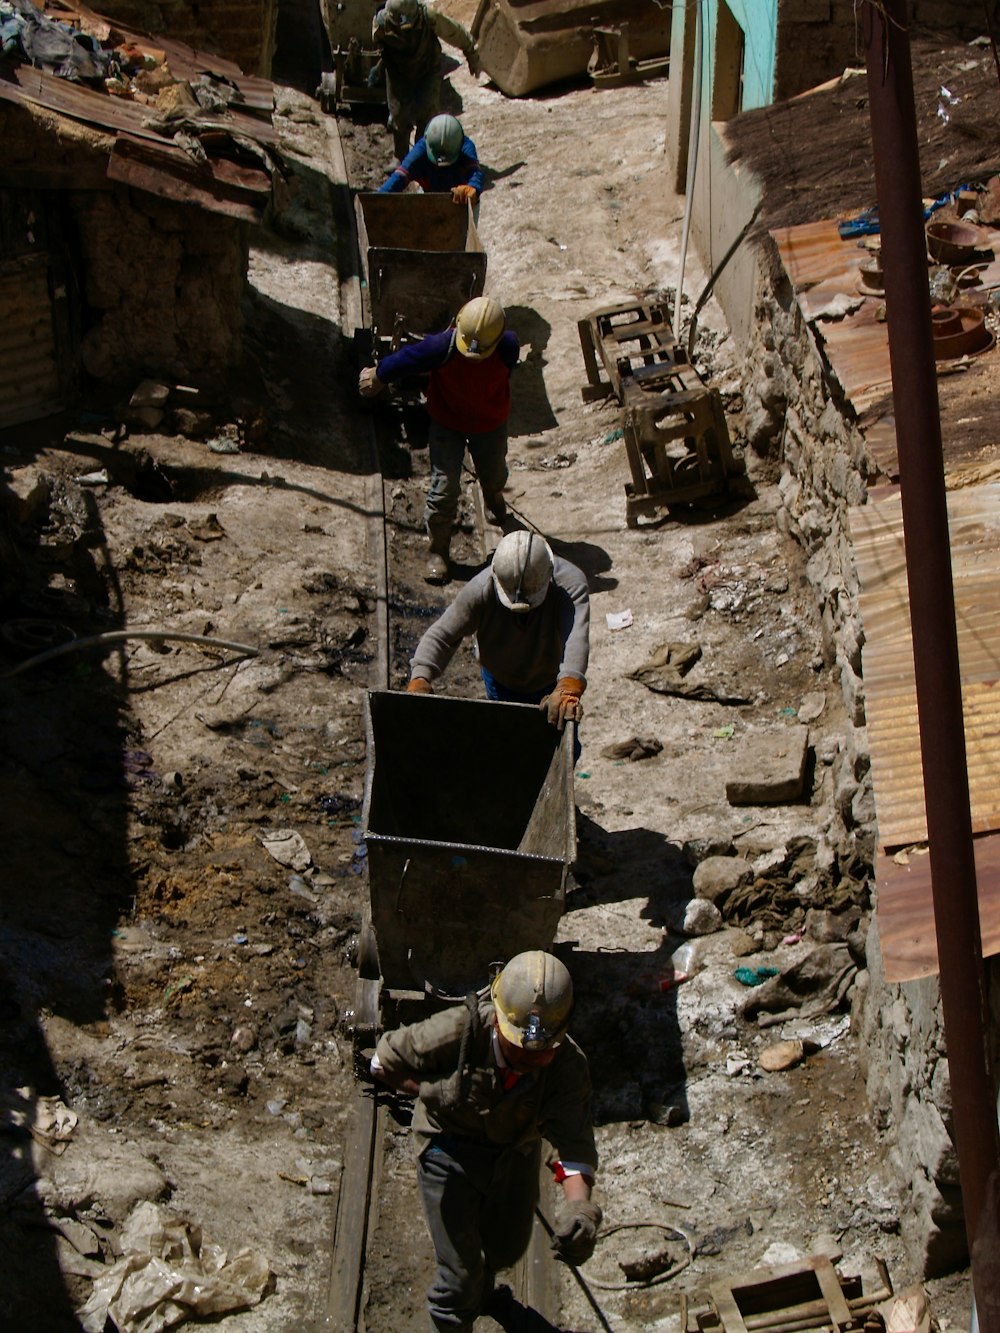 a group of men working on a construction site